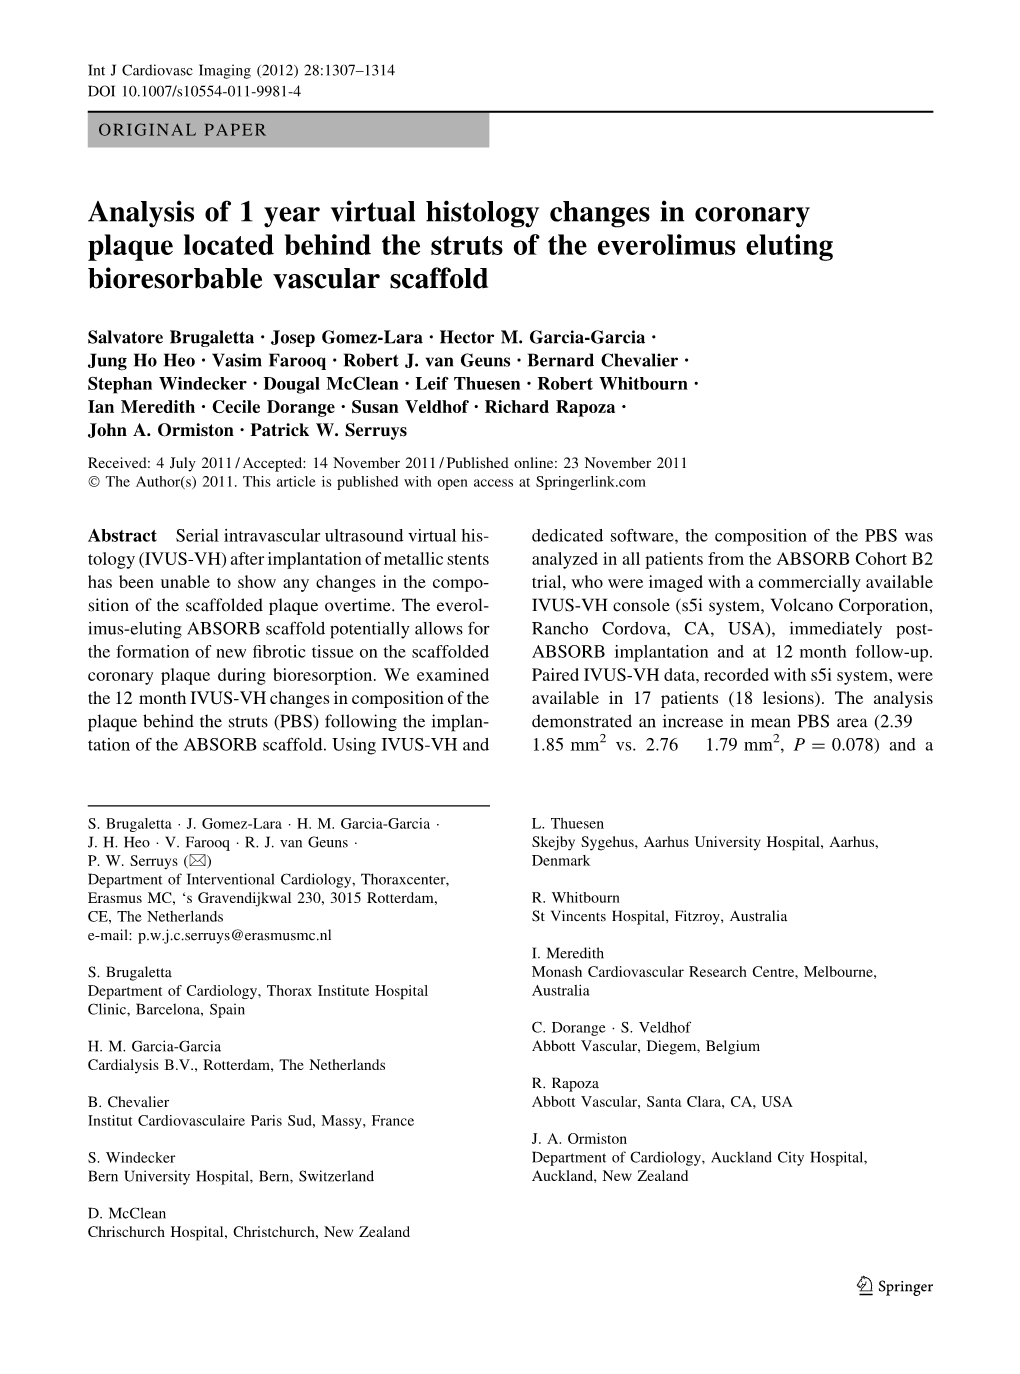 Analysis of 1 Year Virtual Histology Changes in Coronary Plaque Located Behind the Struts of the Everolimus Eluting Bioresorbable Vascular Scaffold